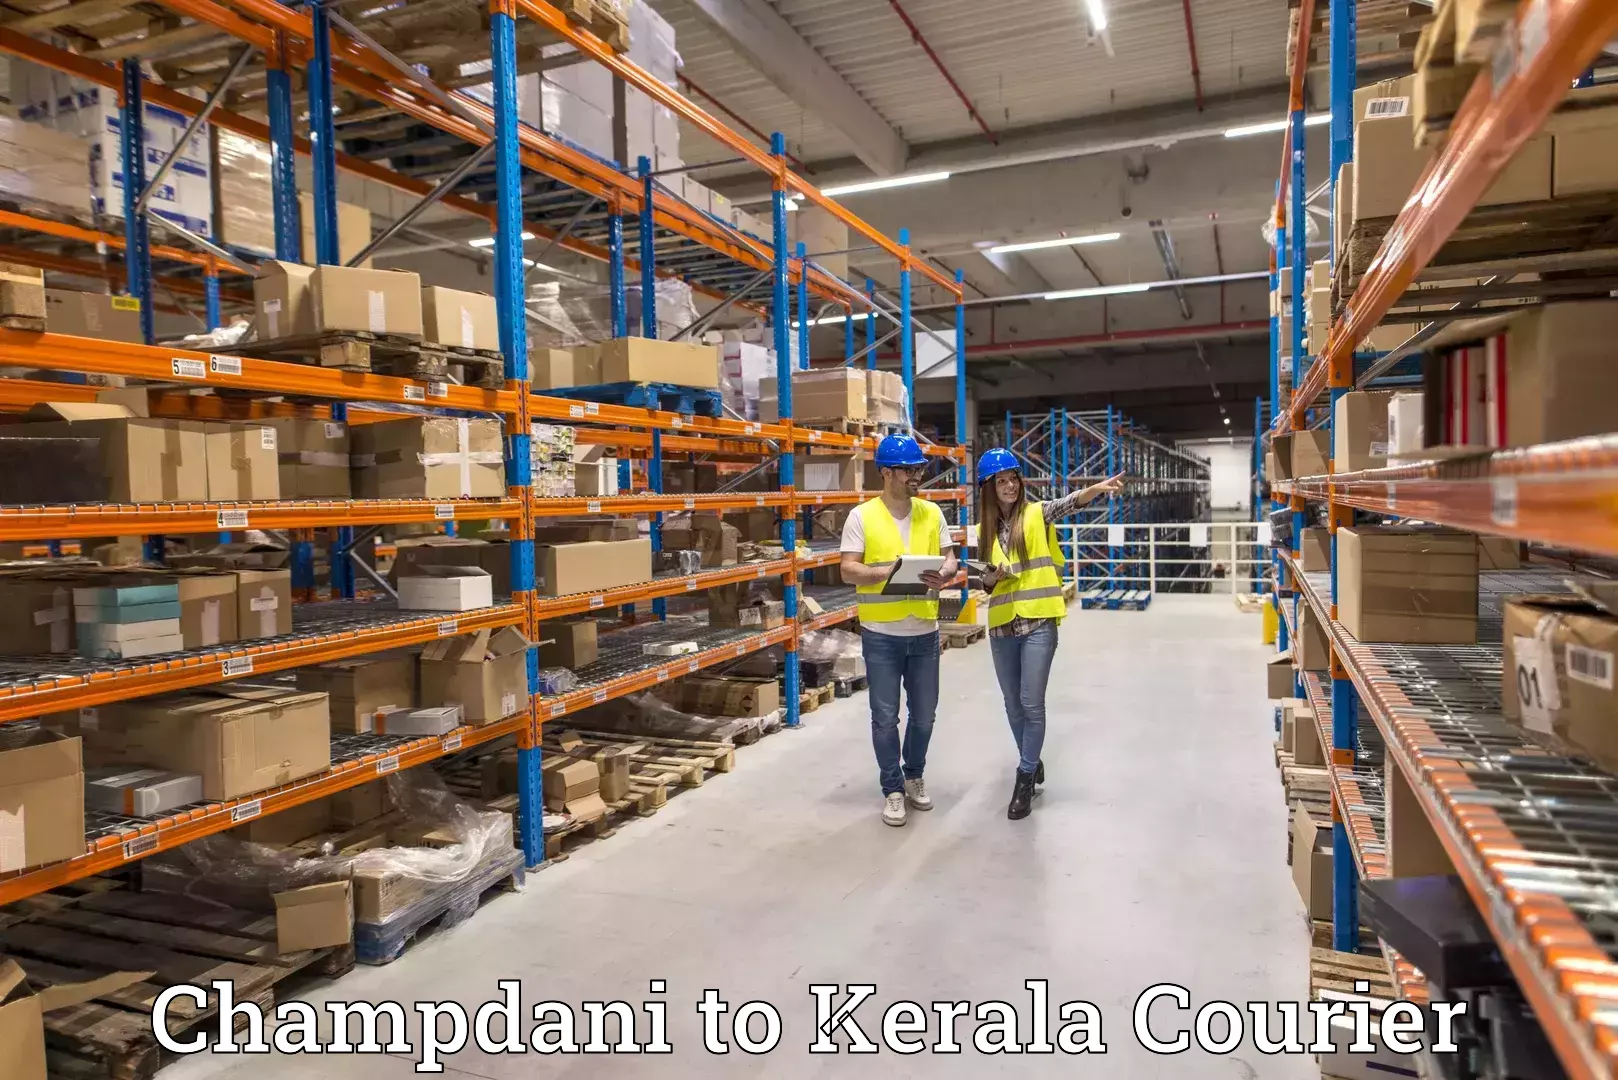 Digital courier platforms Champdani to Cochin University of Science and Technology